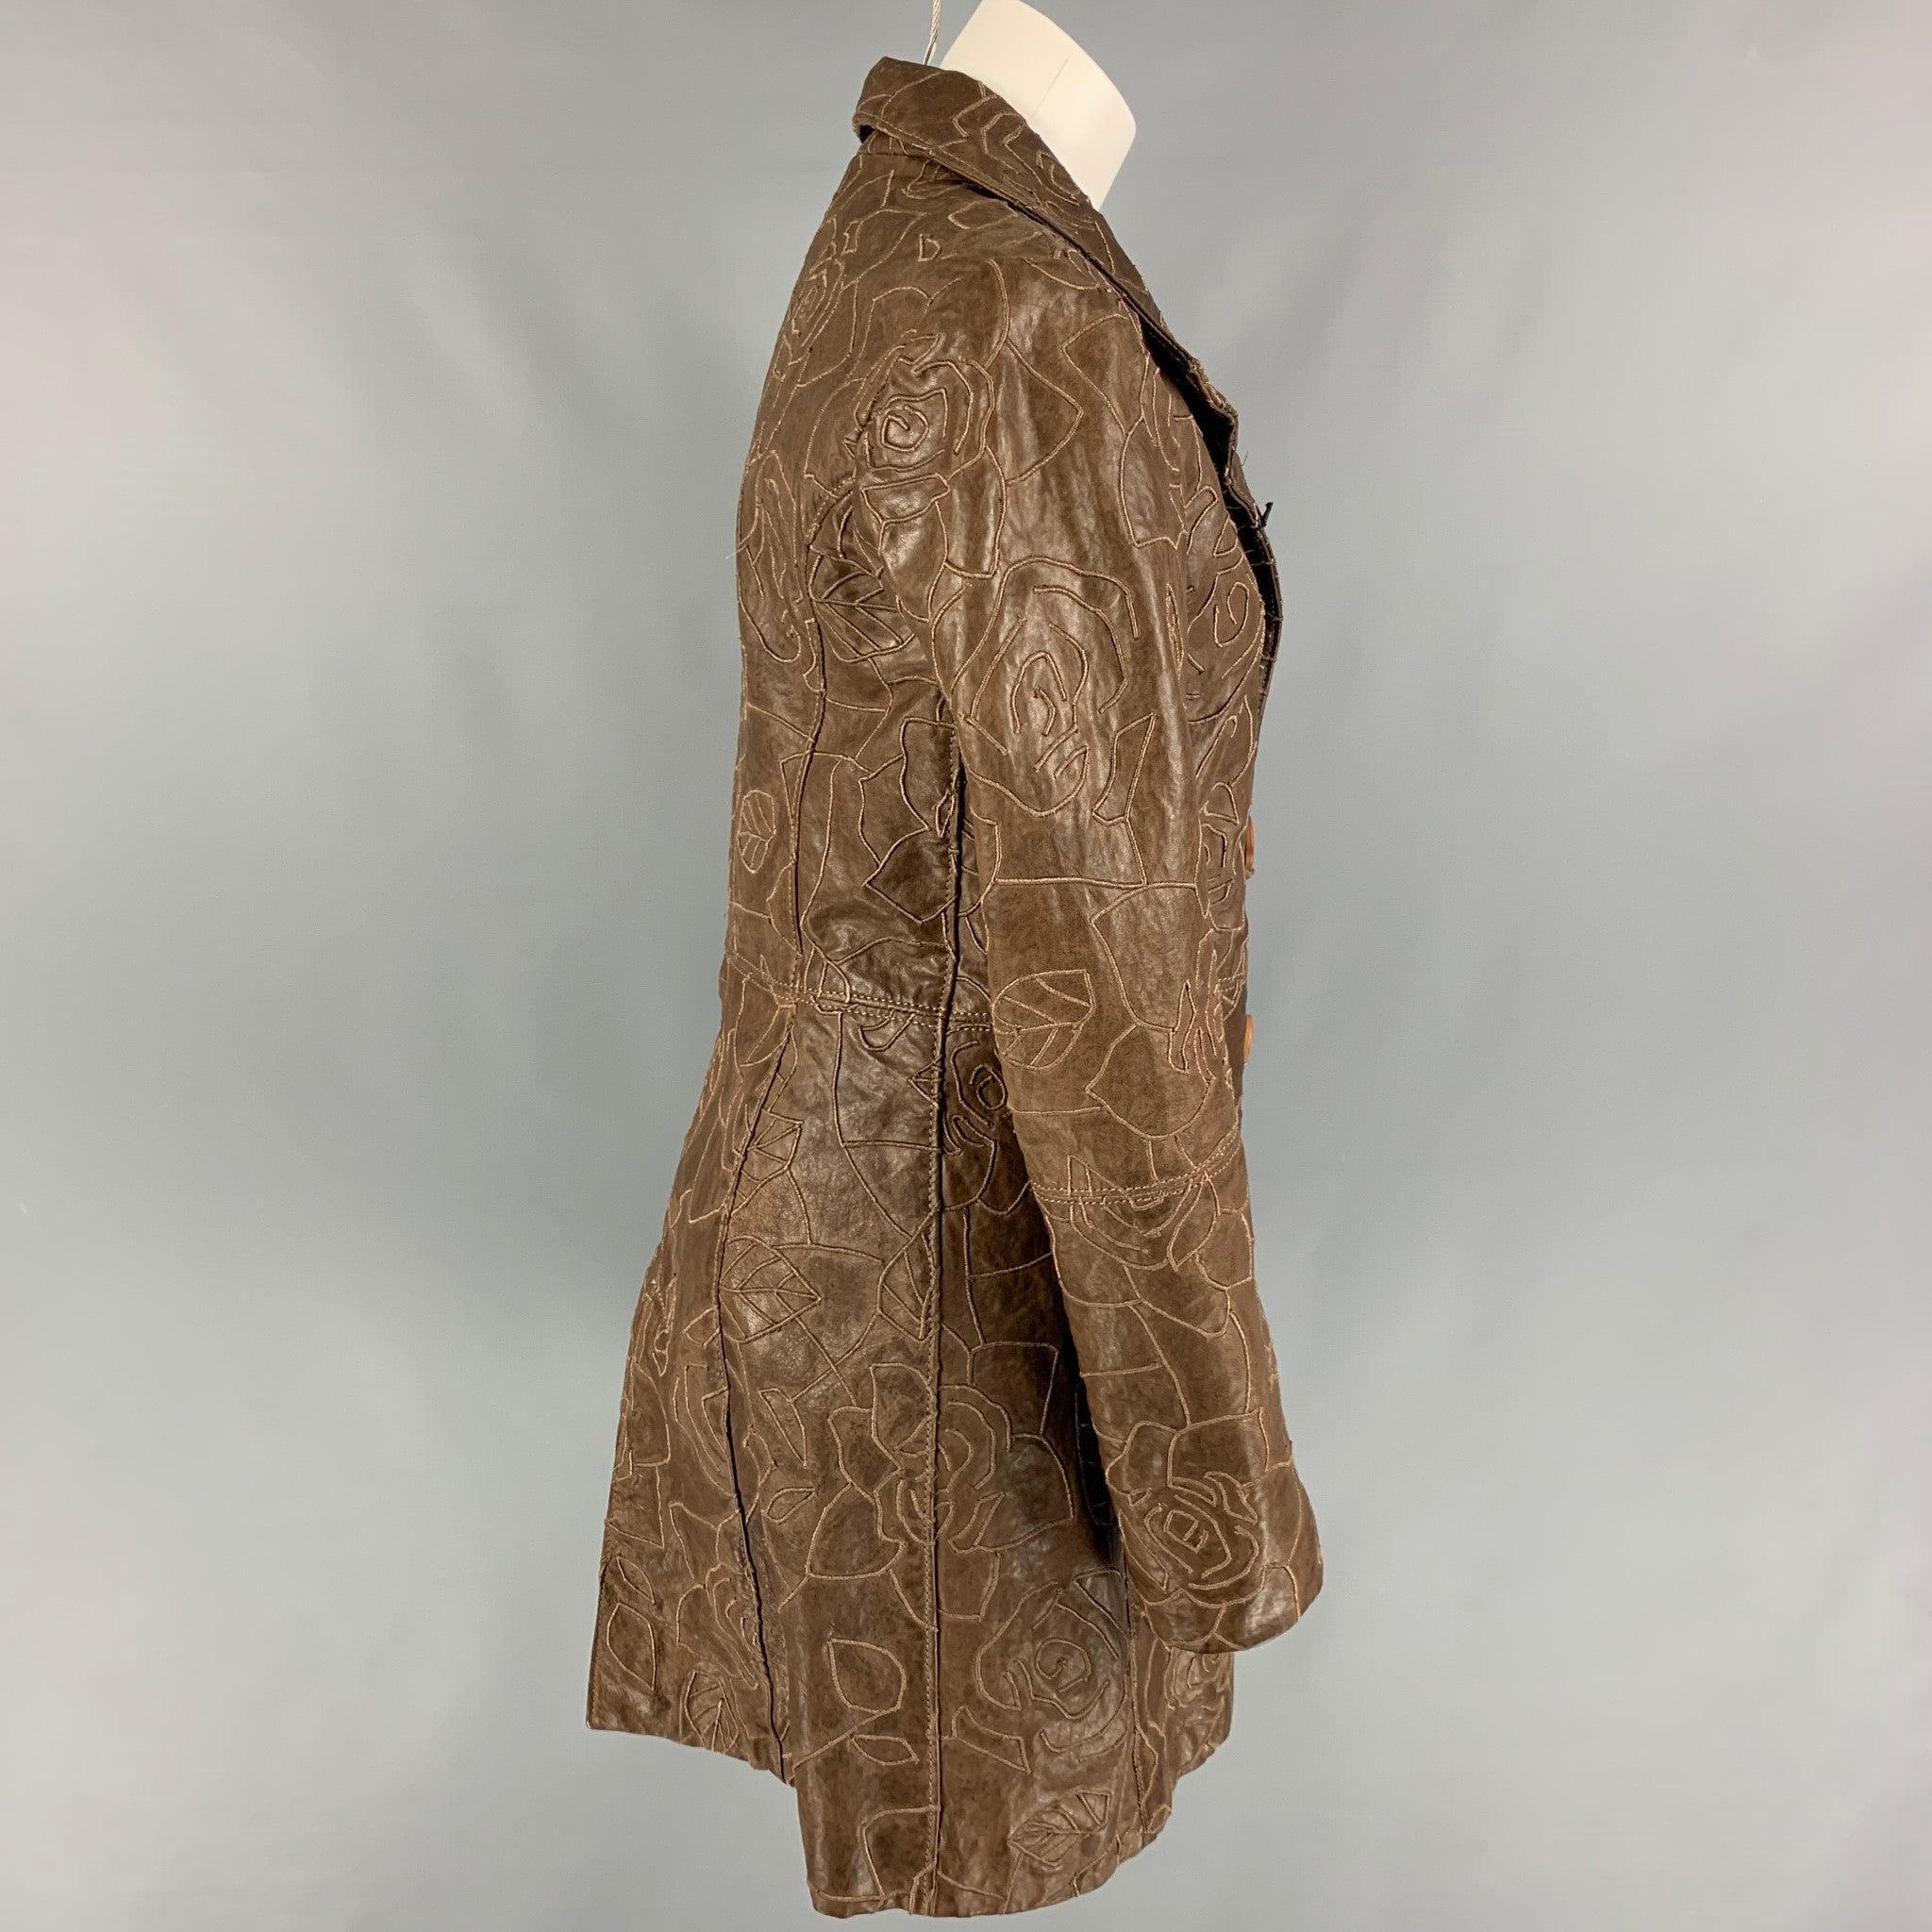 EMPORIO ARMANI coat comes in a brown leather featuring floral embroidery designs, high collar, slit pockets, and a wooden button closure.
Very Good
Pre-Owned Condition. 

Marked:   44 

Measurements: 
 
Shoulder: 16.5 inches  Bust: 36 inches 